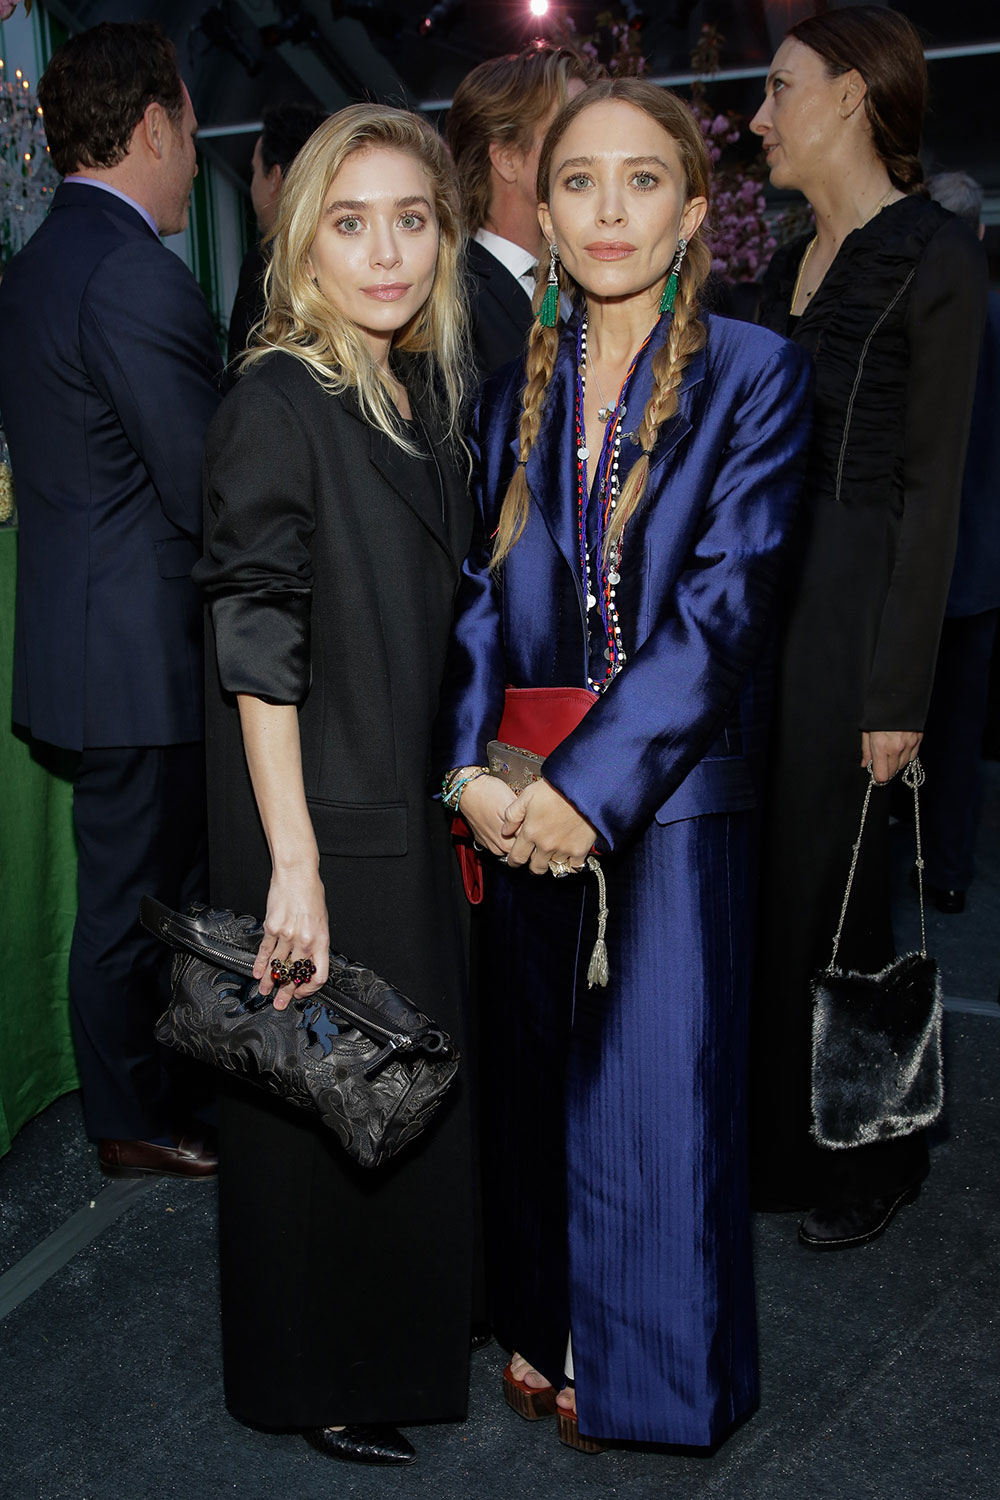 Ashley Olsen and Mary-Kate Olsen attend the 40th Anniversary of Studio In A School at The Seagram Building Plaza in New York City.